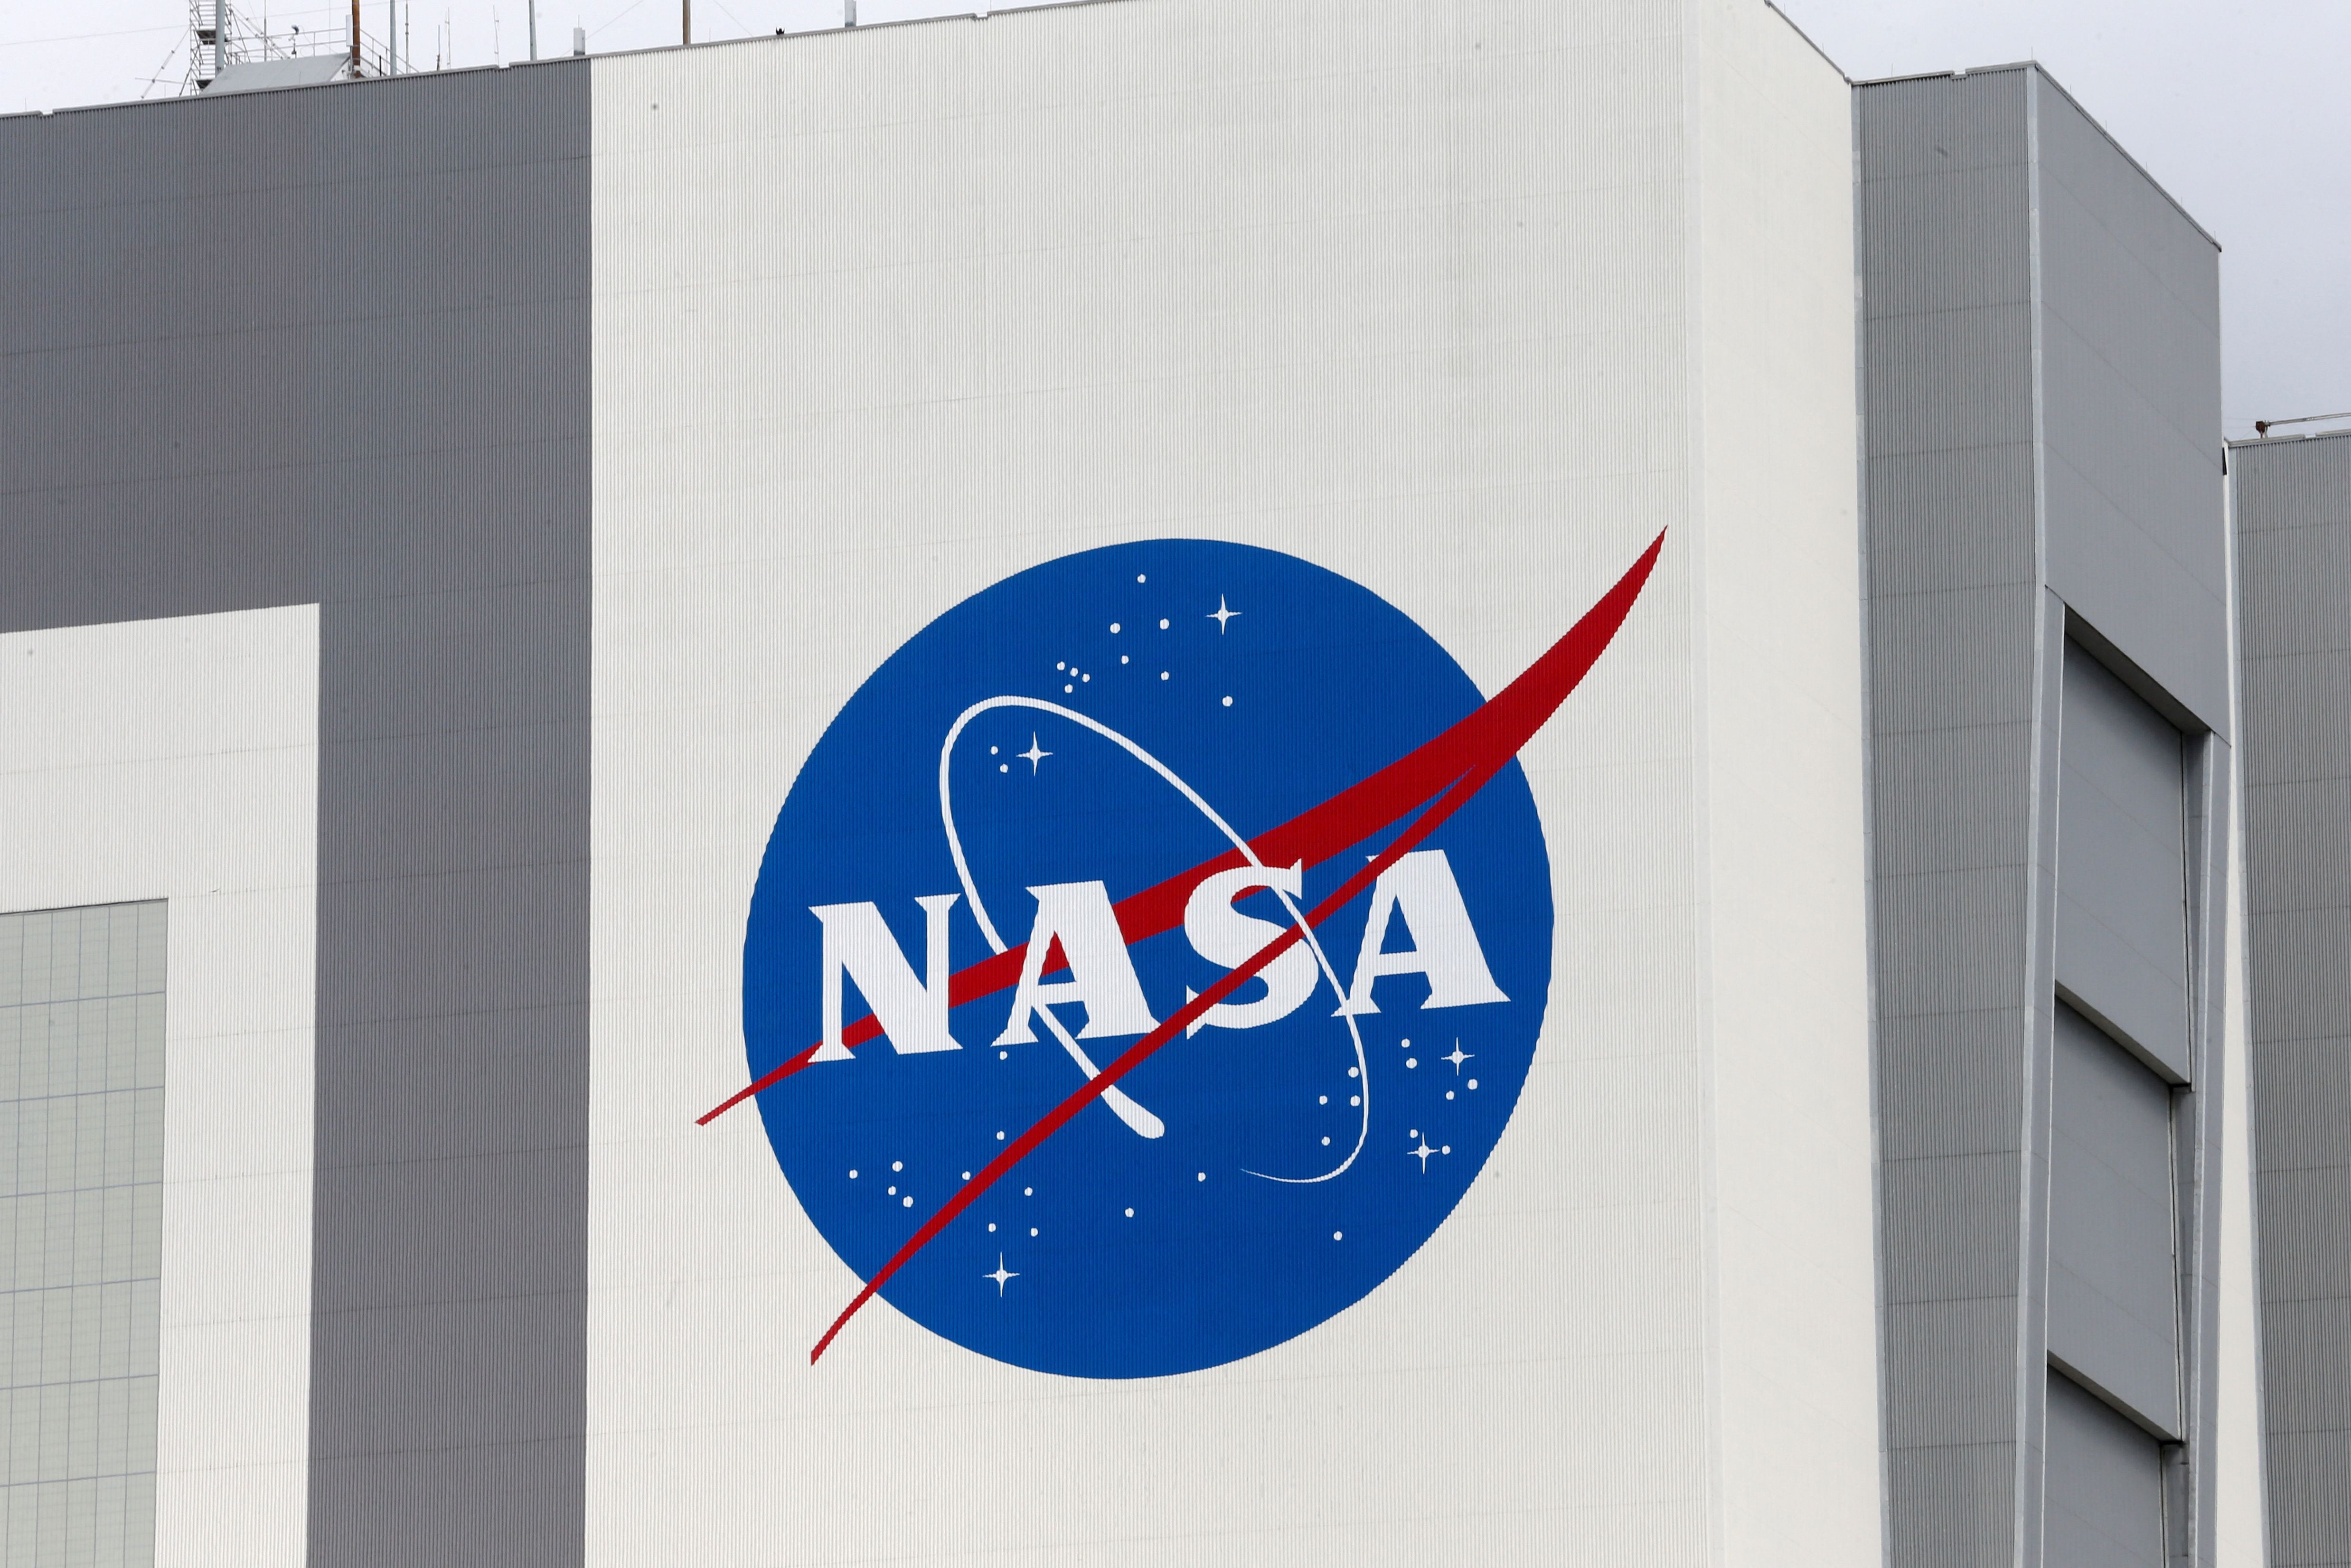 FILE PHOTO: The NASA logo is seen at Kennedy Space Center in Cape Canaveral, Florida, U.S., April 16, 2021. REUTERS/Joe Skipper/File Photo